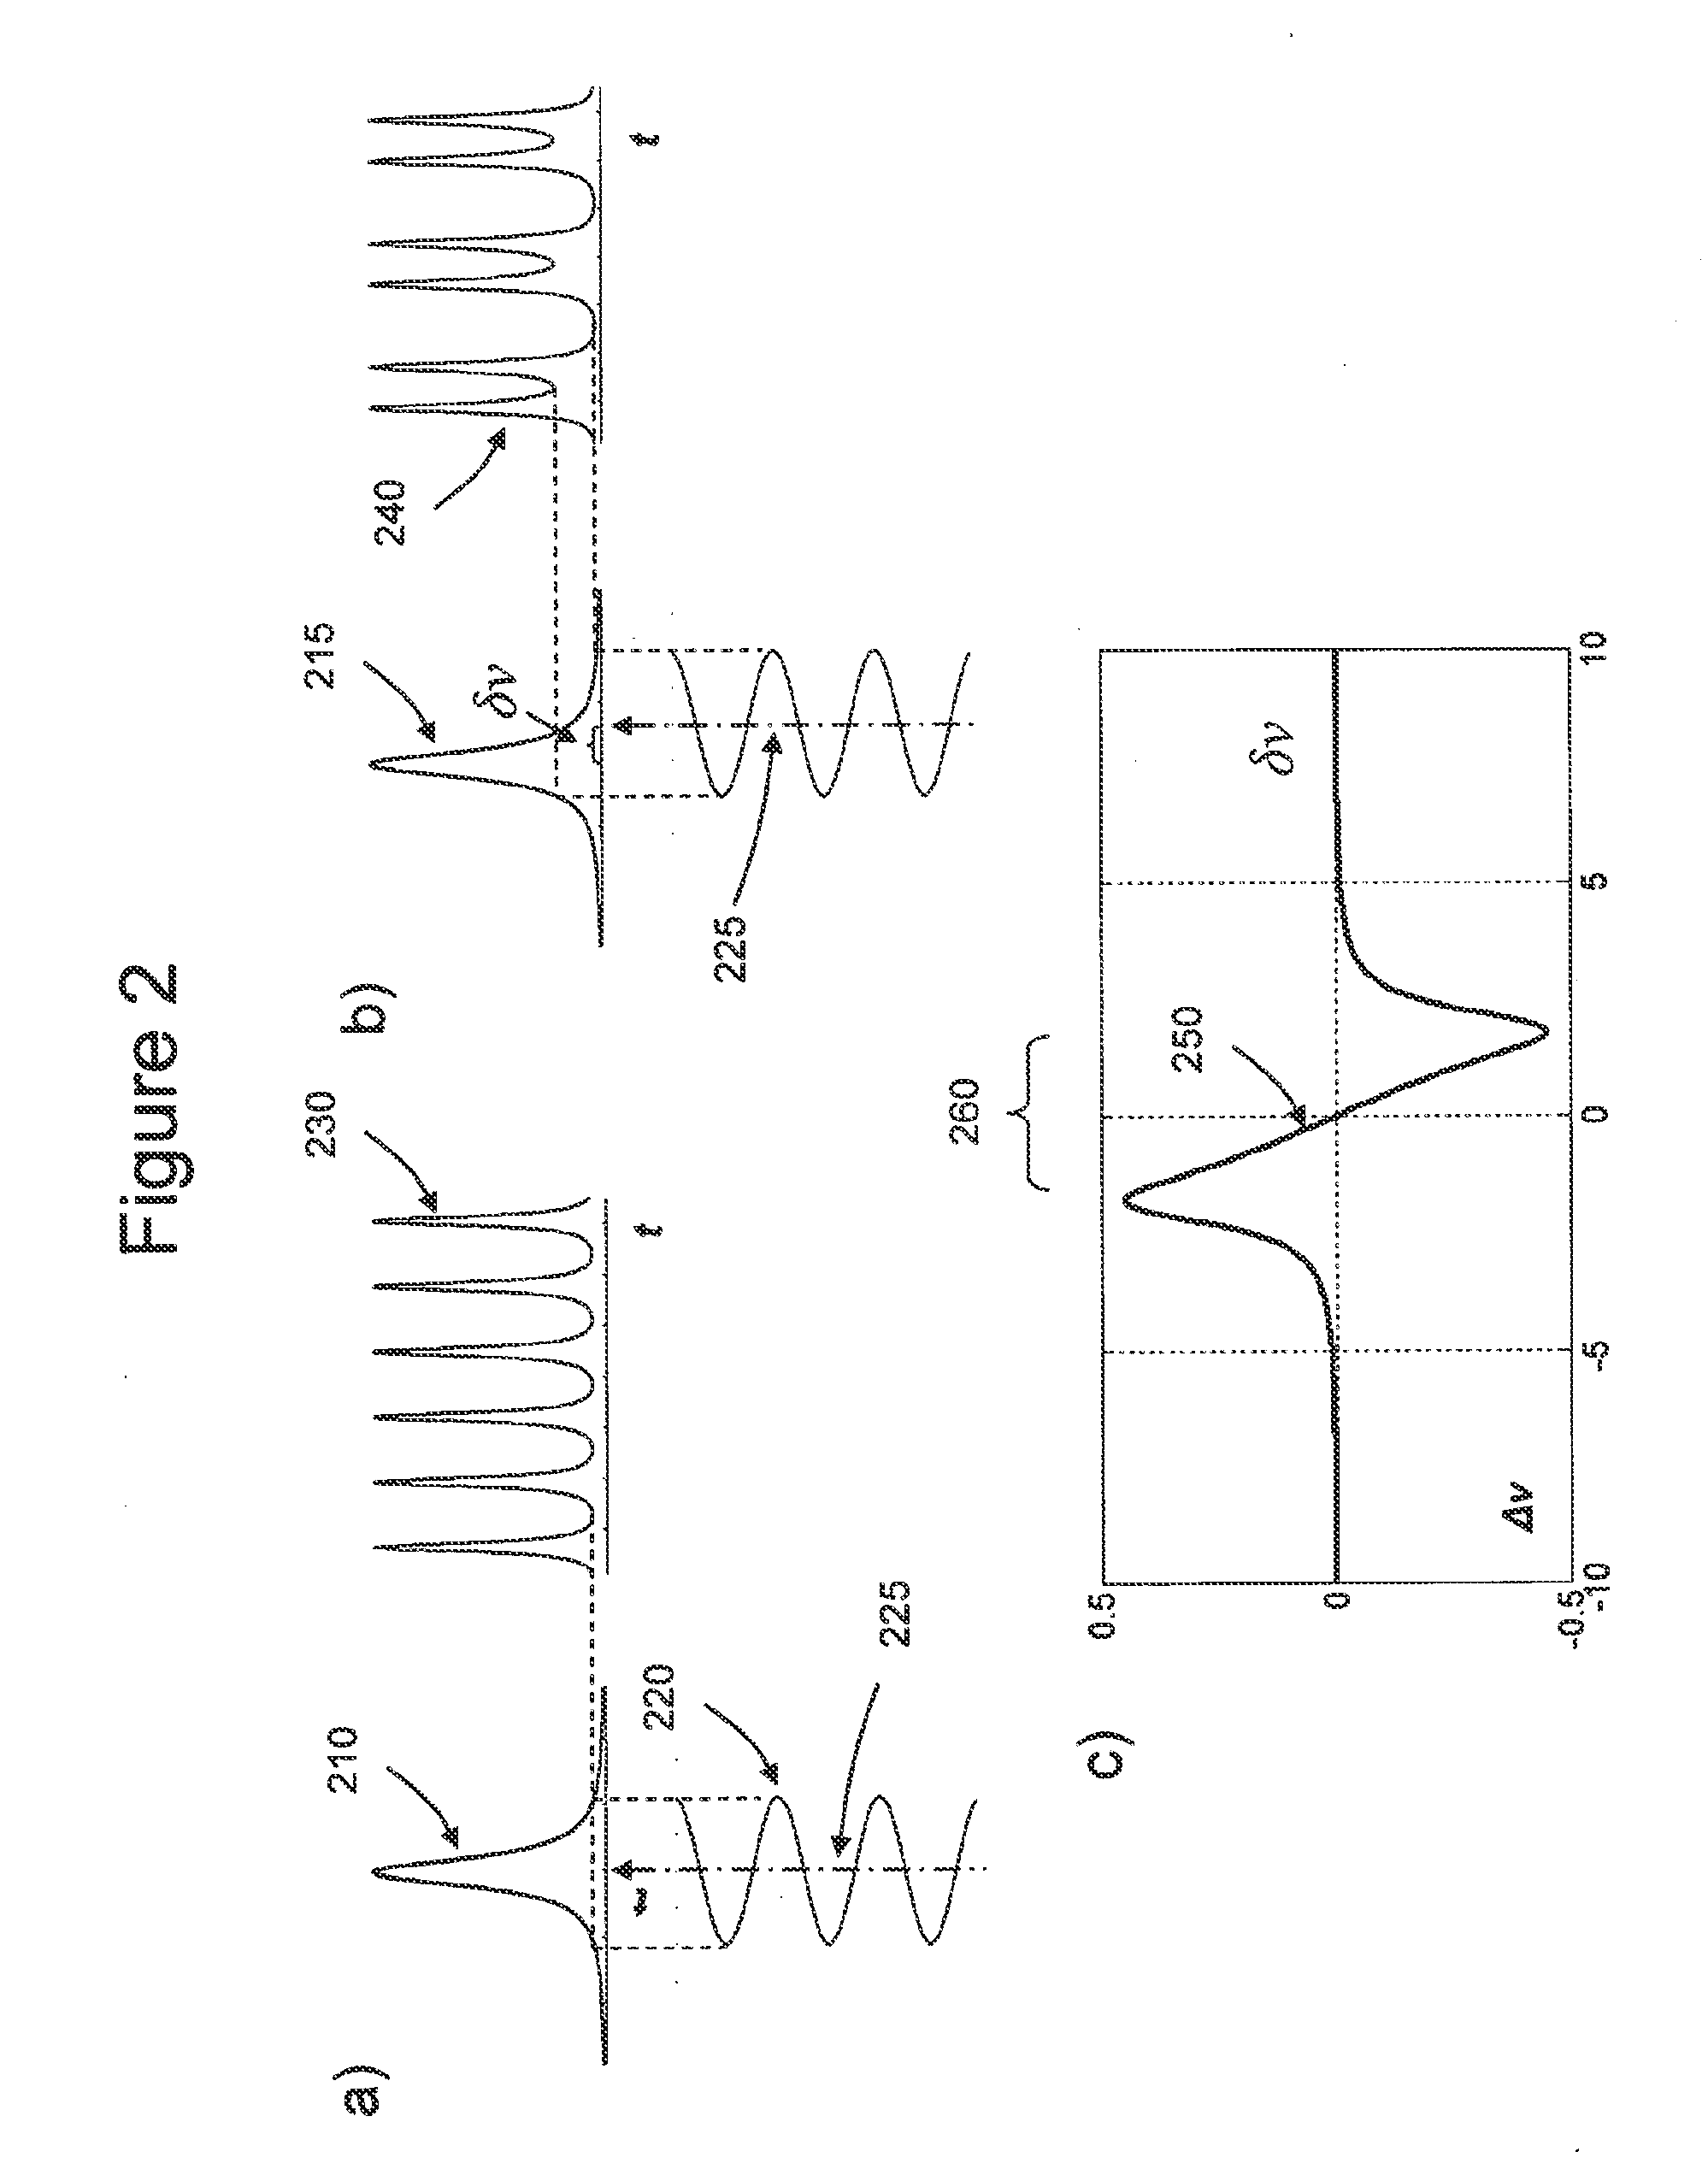 Method and apparatus for the photo-acoustic identification and quantification of analyte species in a gaseous or liquid medium